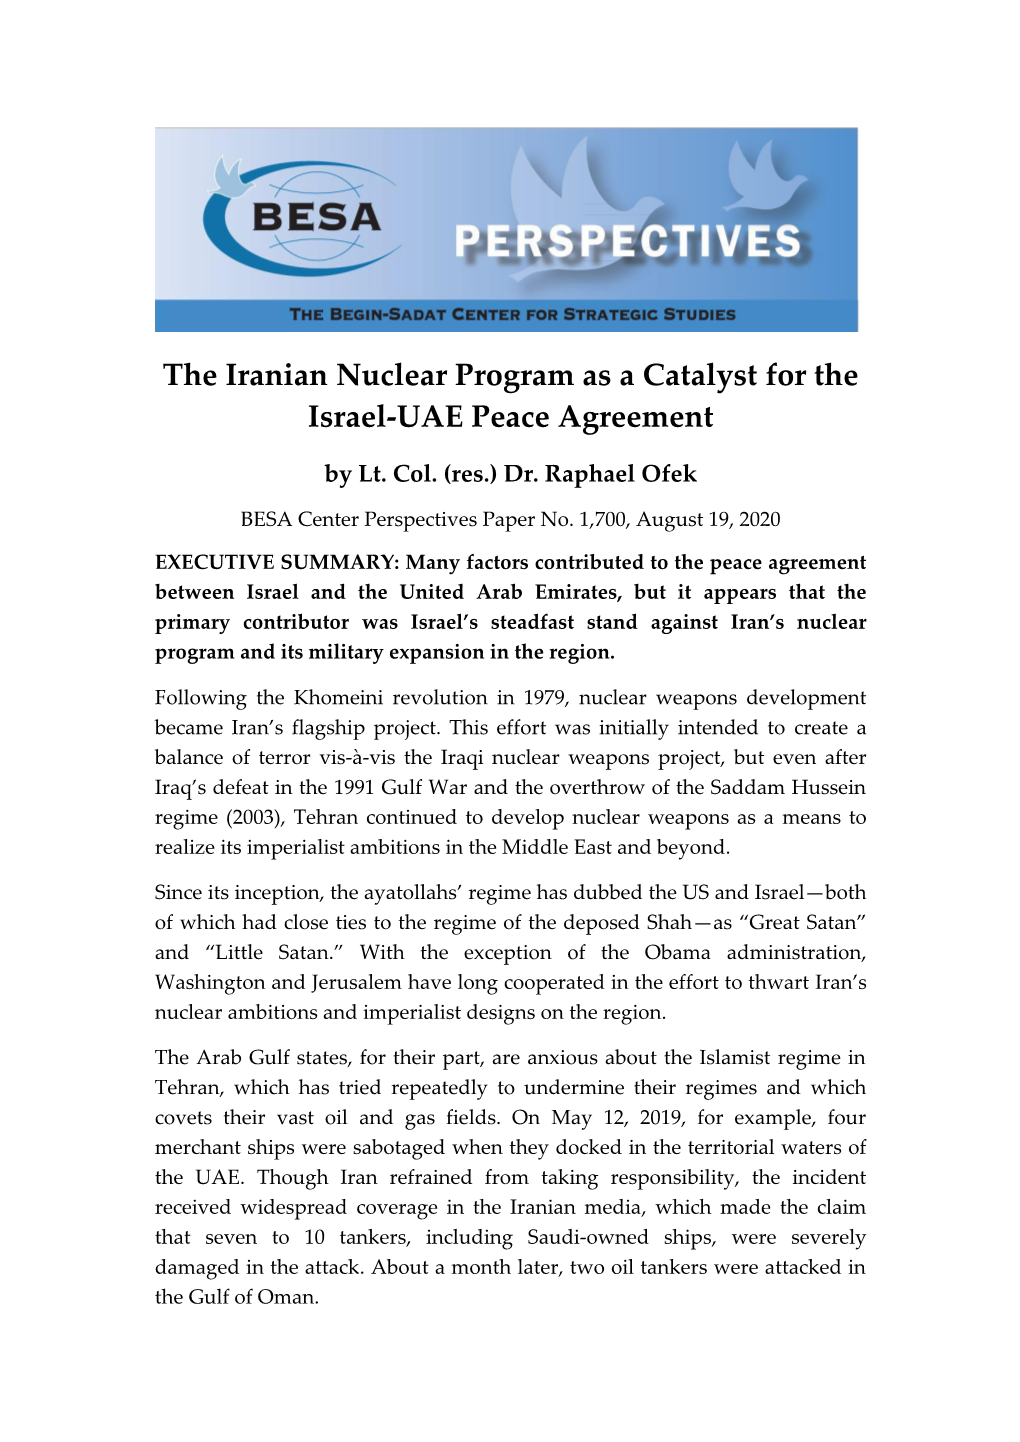 The Iranian Nuclear Program As a Catalyst for the Israel-UAE Peace Agreement